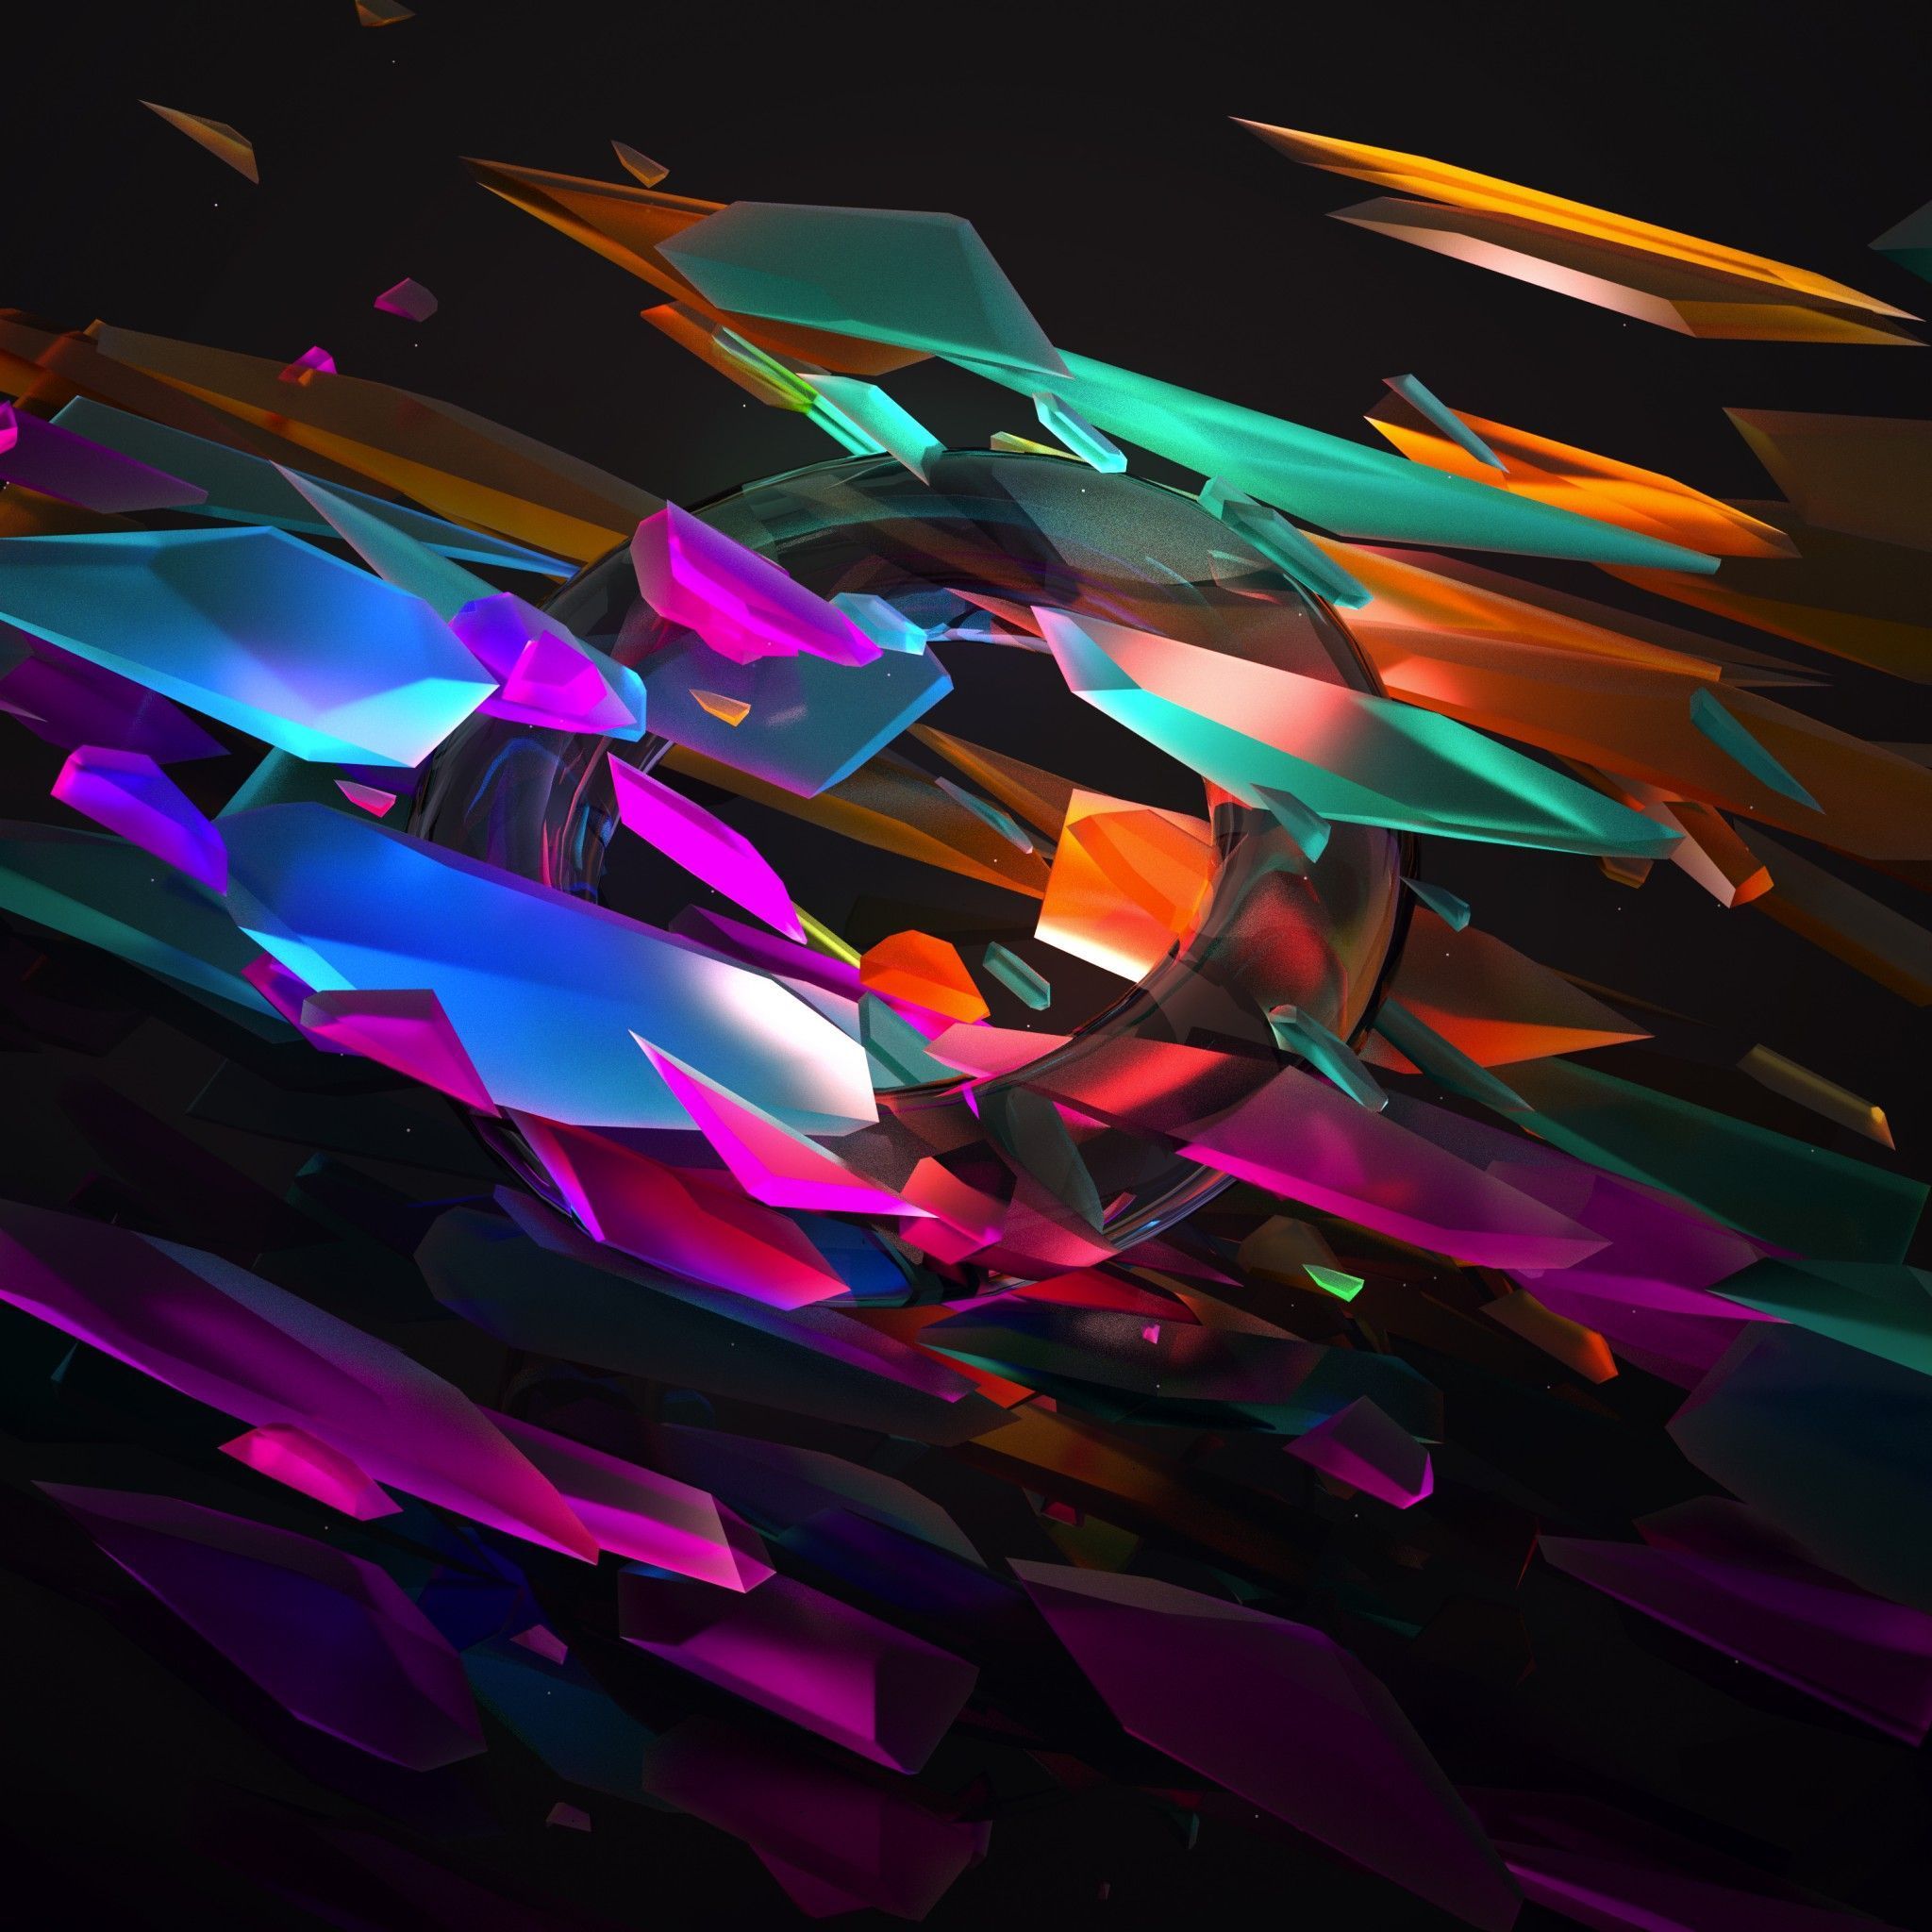  Coole 3D Hintergrundbild 2048x2048. Gamut to see more cool 3D abstract art wallpaper by Justin Maller! - Abstract art wallpaper, Abstract, Wallpaper background